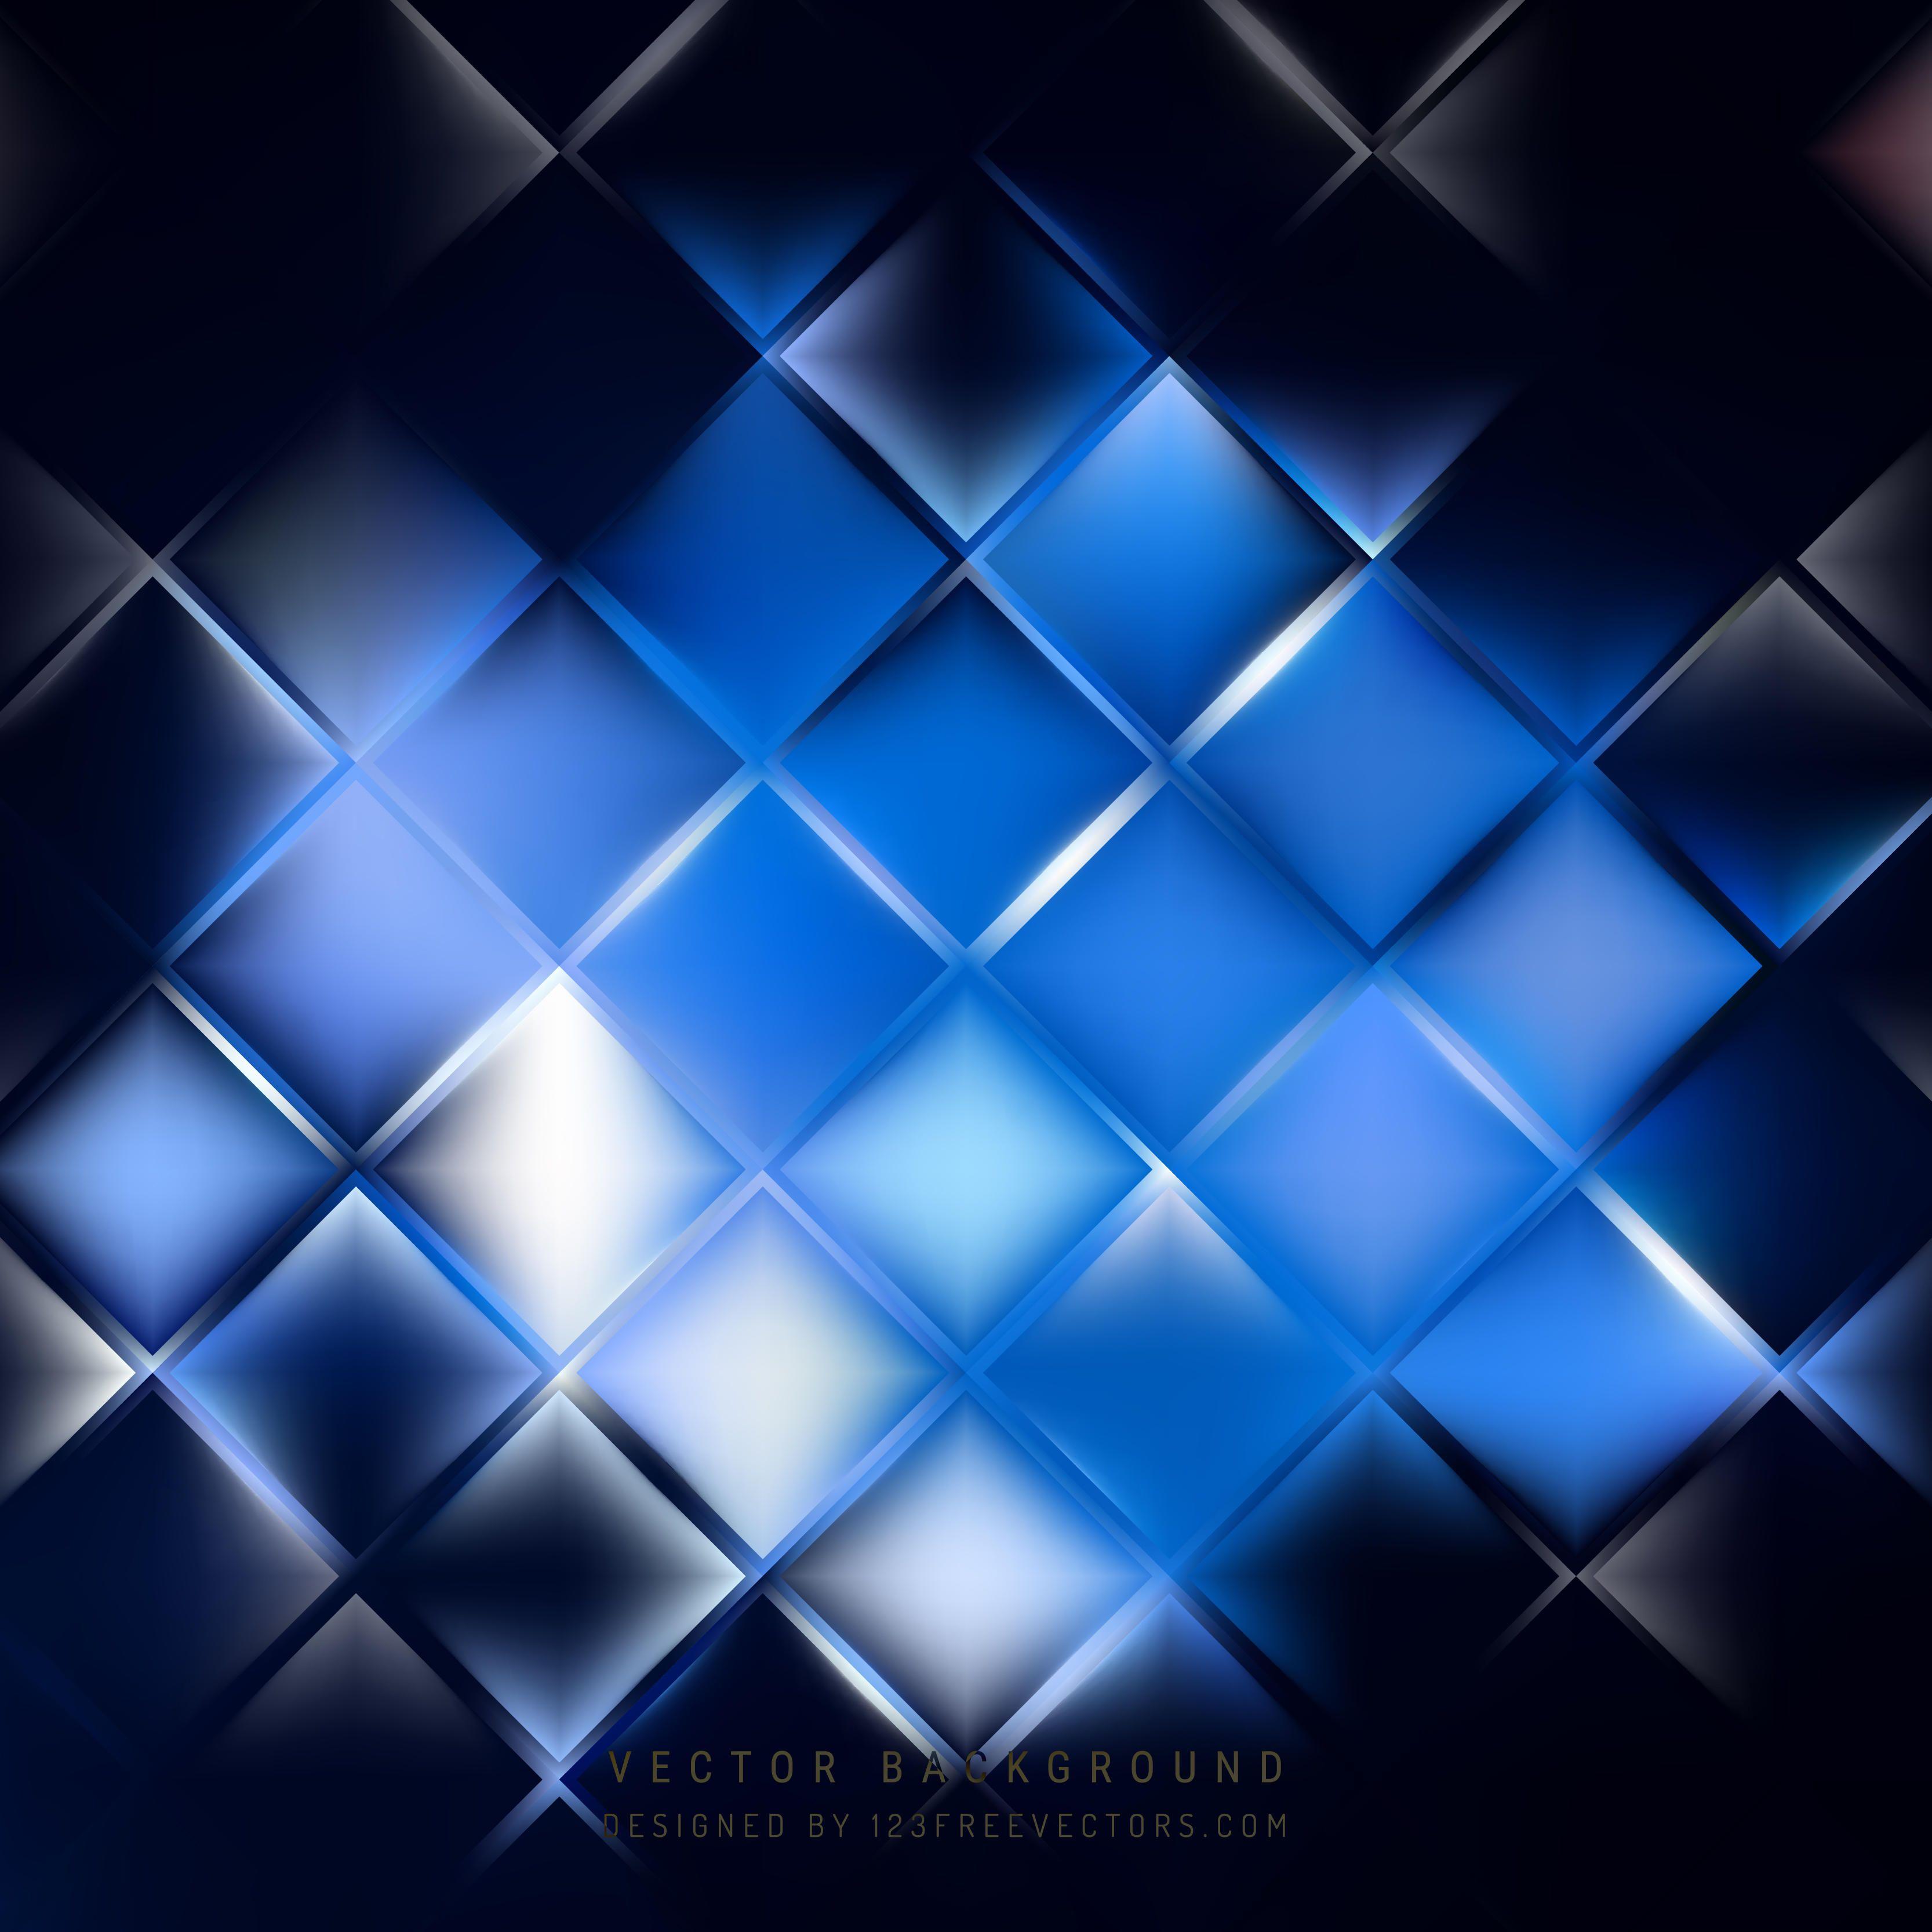 Abstract Blue Black Geometric Square BackgroundFreevectors